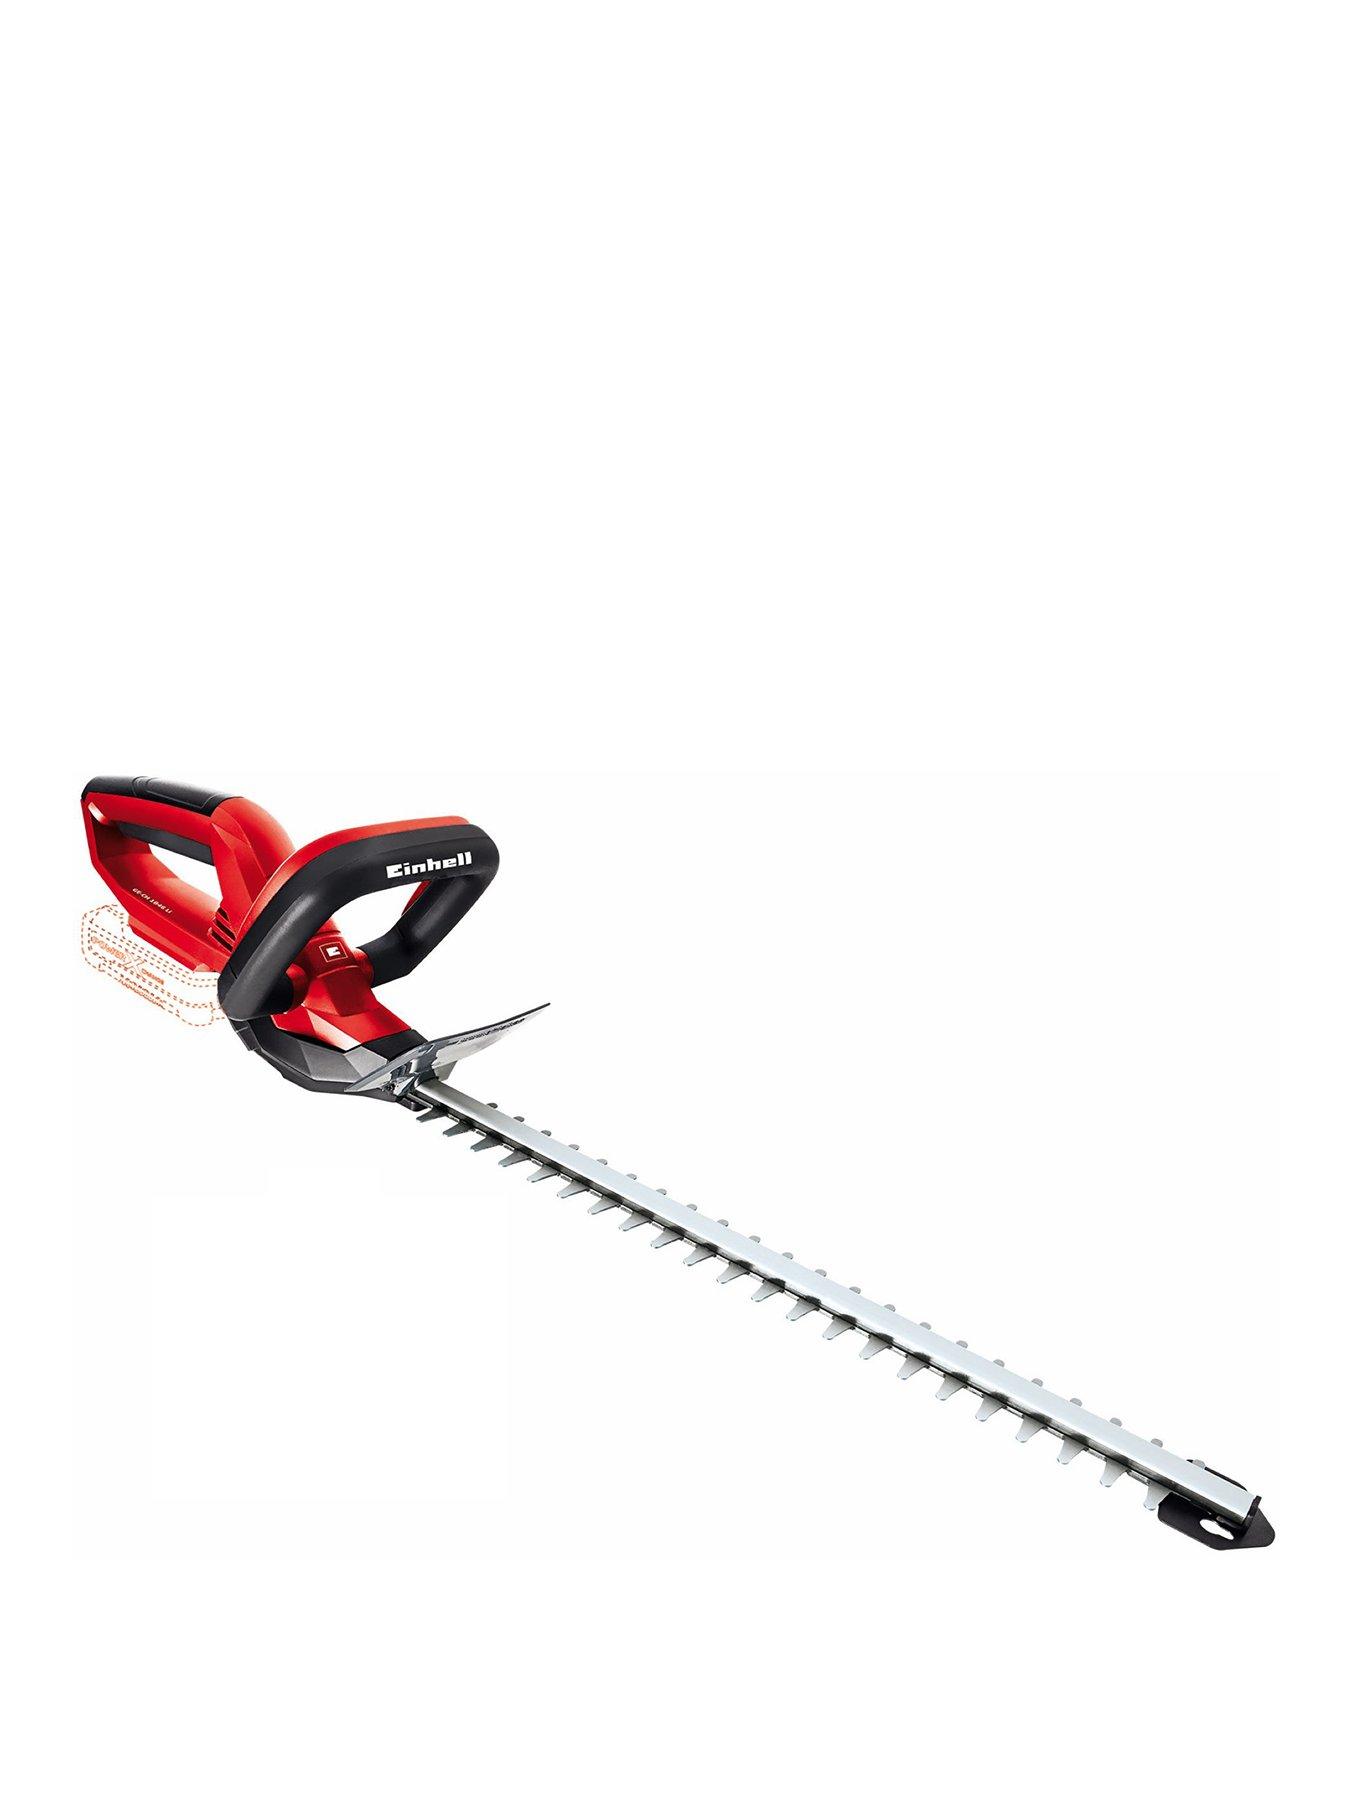 https://media.very.ie/i/littlewoodsireland/UDP3L_SQ1_0000000088_NO_COLOR_SLf/einhell-pxc-46cm-cordless-hedge-trimmer-ge-ch-1846-li-solo-18v-without-battery.jpg?$180x240_retinamobilex2$